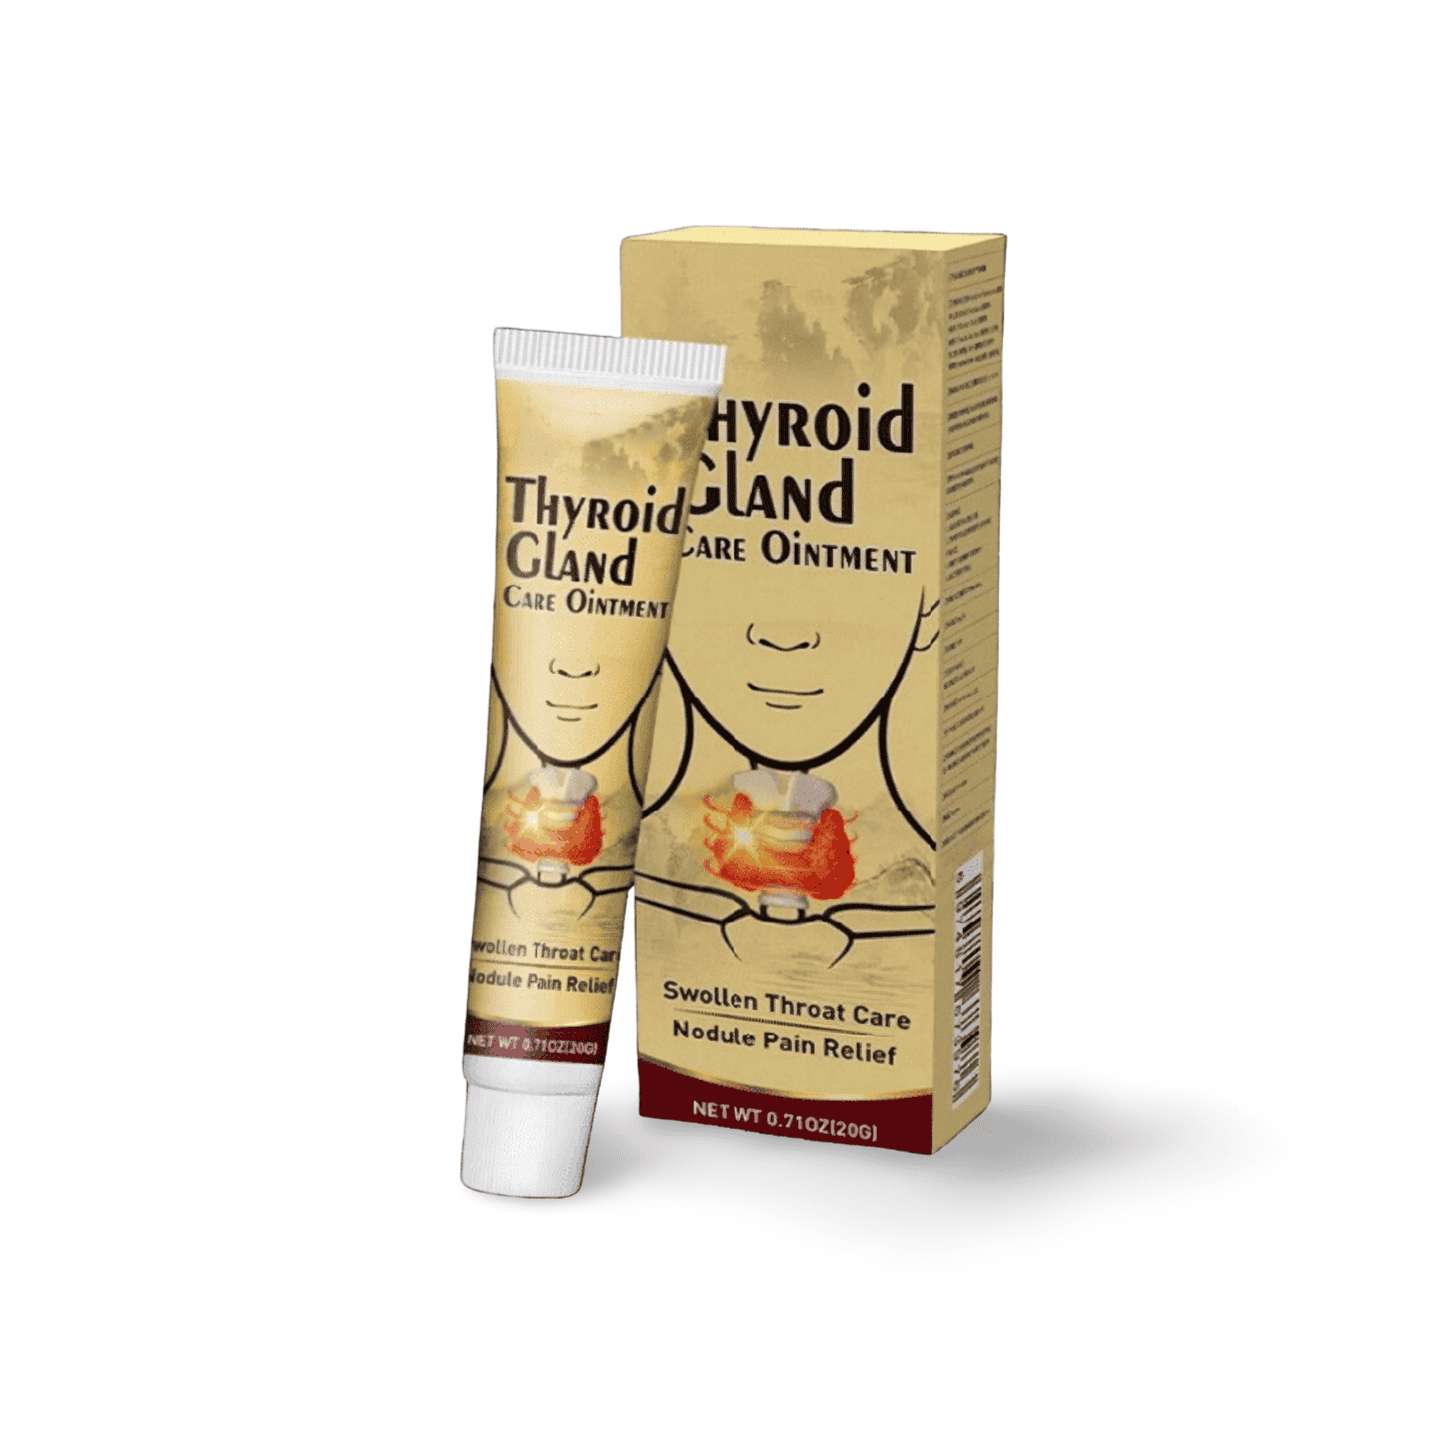 Sumifun Thyroid Gland Pain Relief Anti-Swelling Ointment